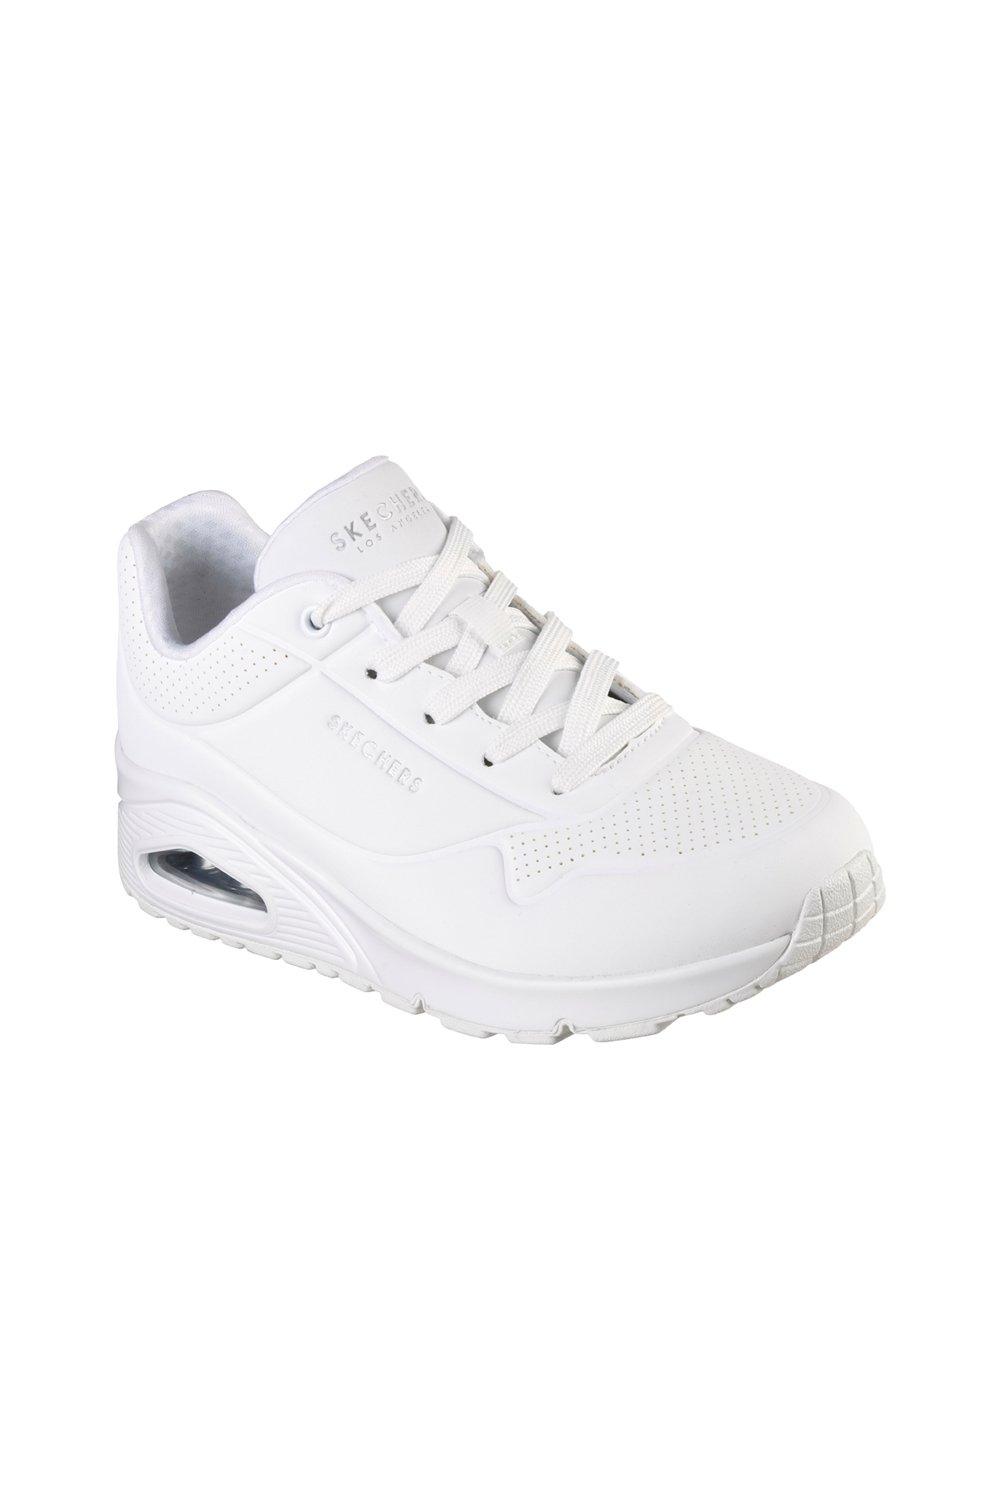 Кроссовки Uno - Stand On Air Trainers Debenhams, белый кроссовки uno stand on air trainers debenhams розовый